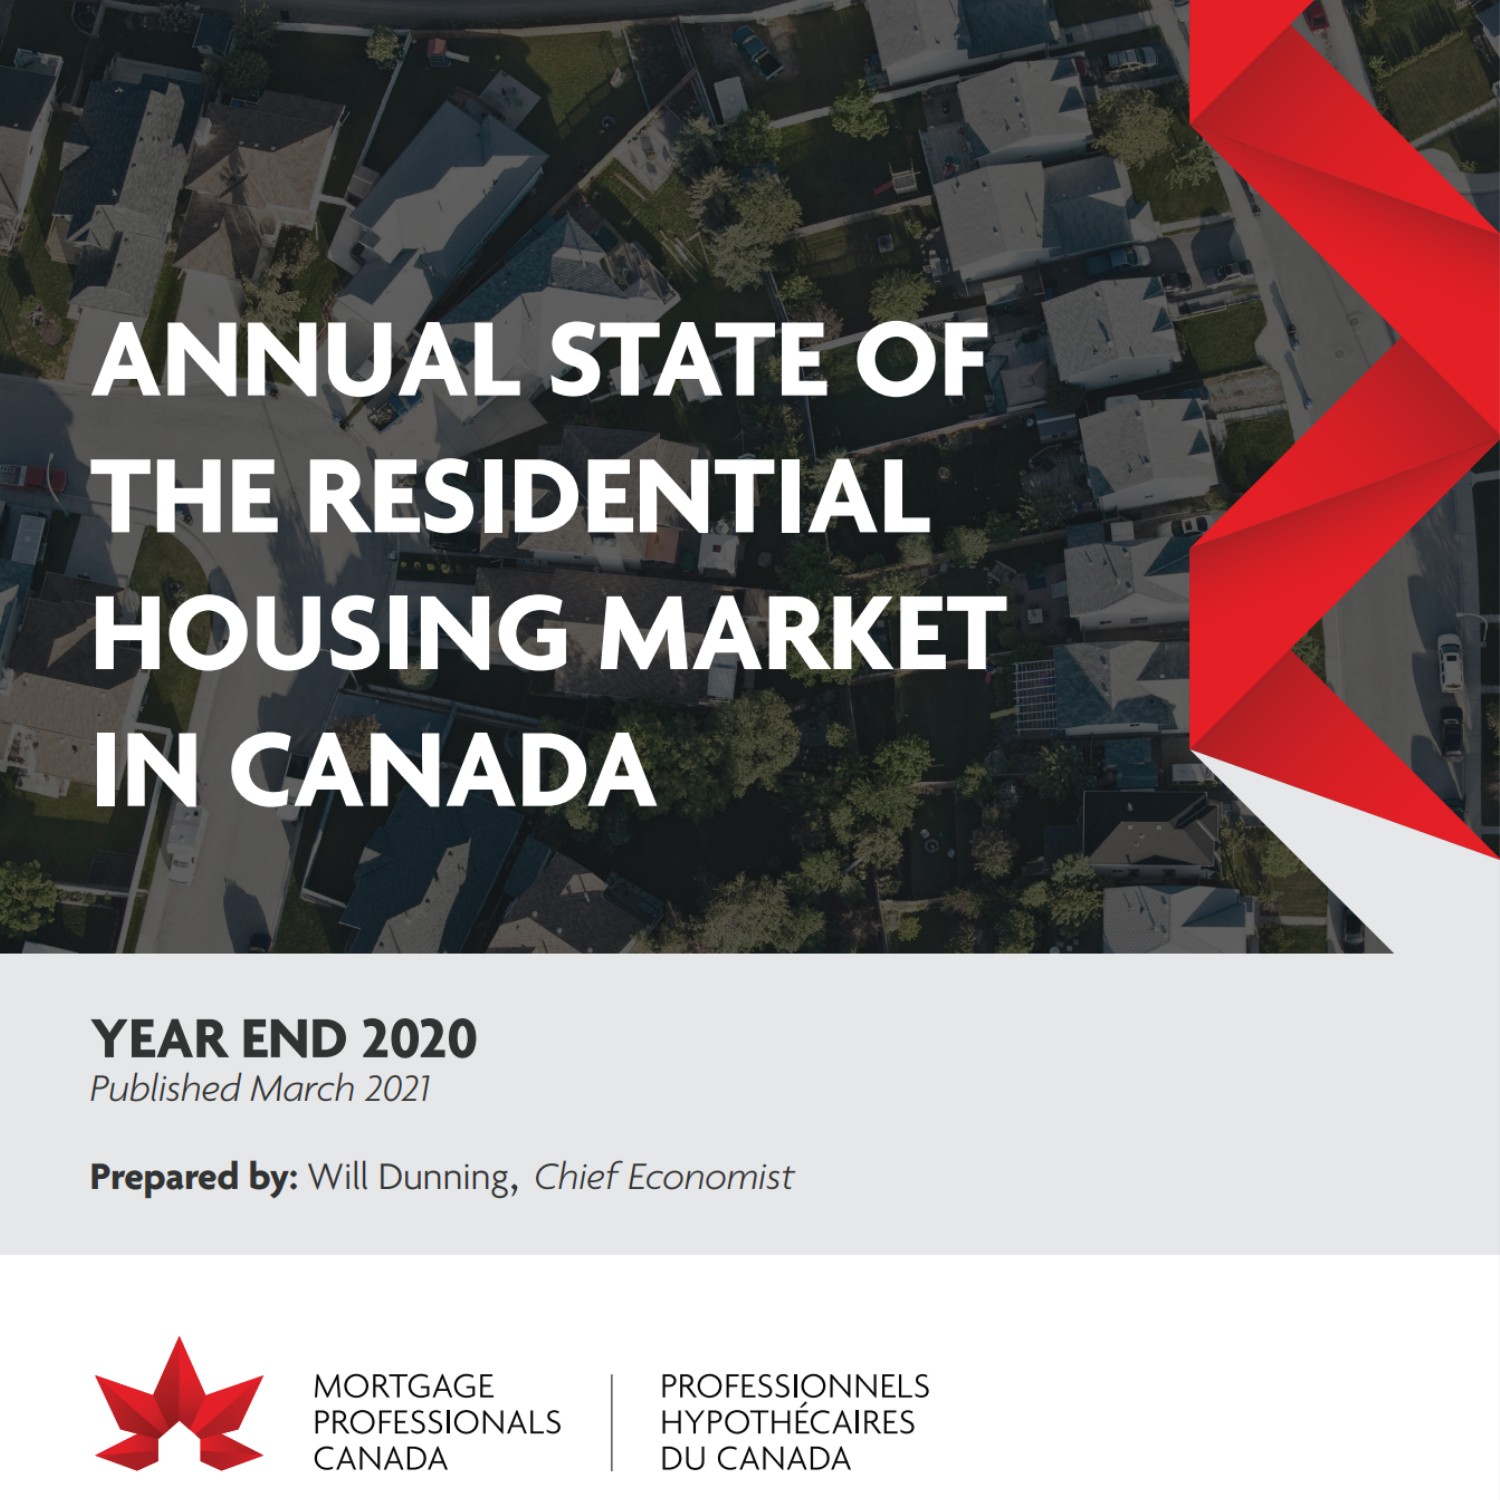 https://mortgageproscan.ca/home/urgent-updates/item/2021/03/25/annual-state-of-the-residential-mortgage-market-in-canada-2020-report-now-available